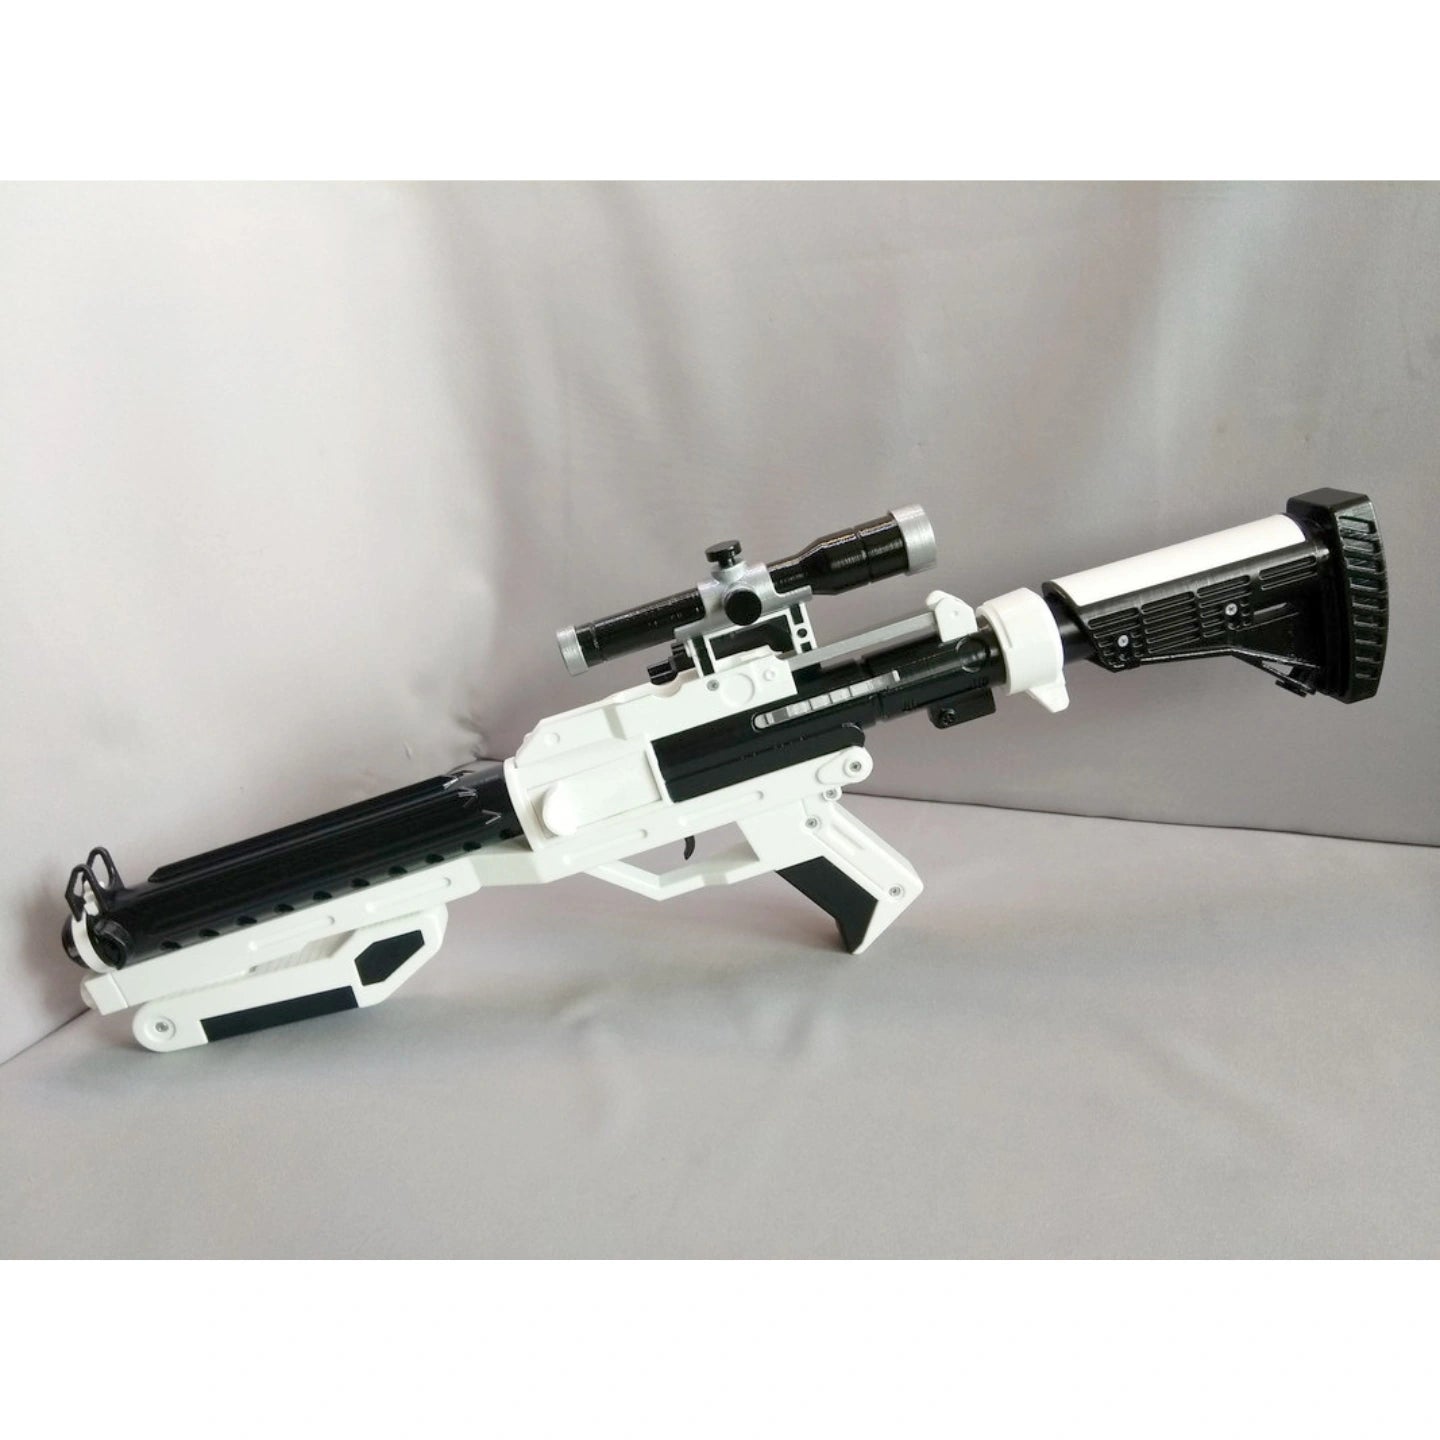 F-11D Blaster Rifle - Star Wars - DIY KIT - With Stand